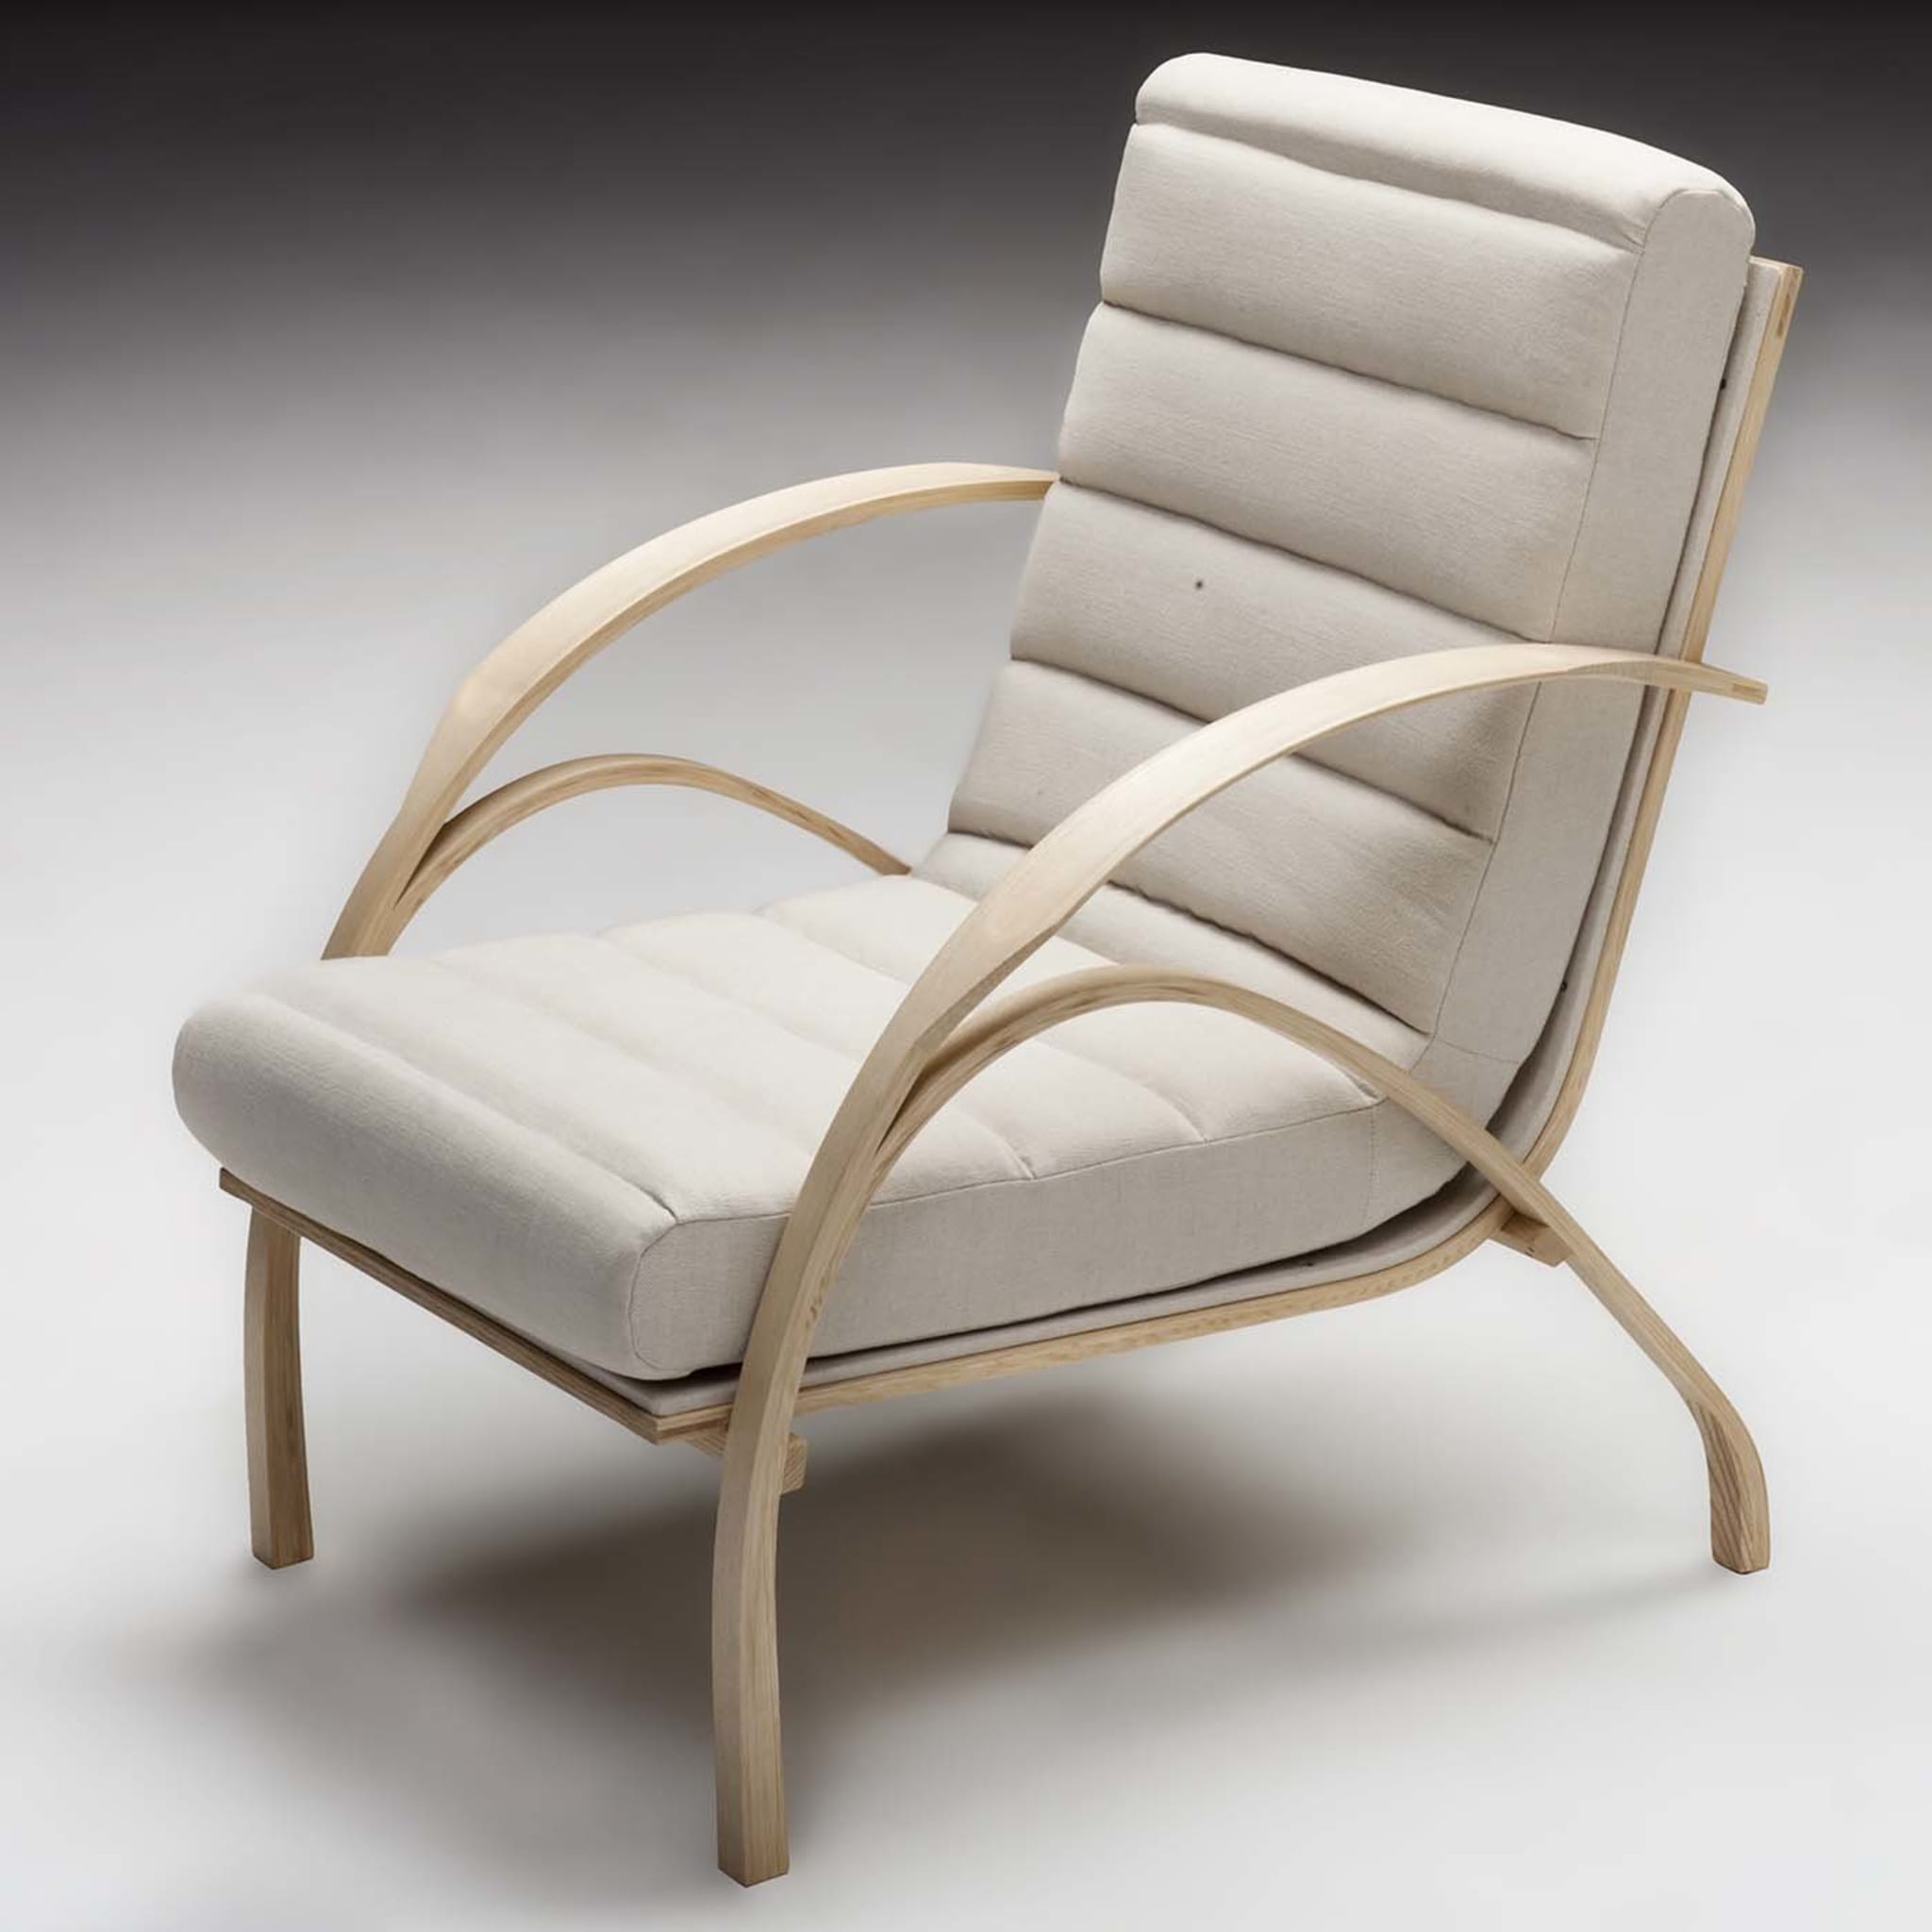 Armchair in Curved Wood 1957 by Carlo De Carli - Alternative view 1